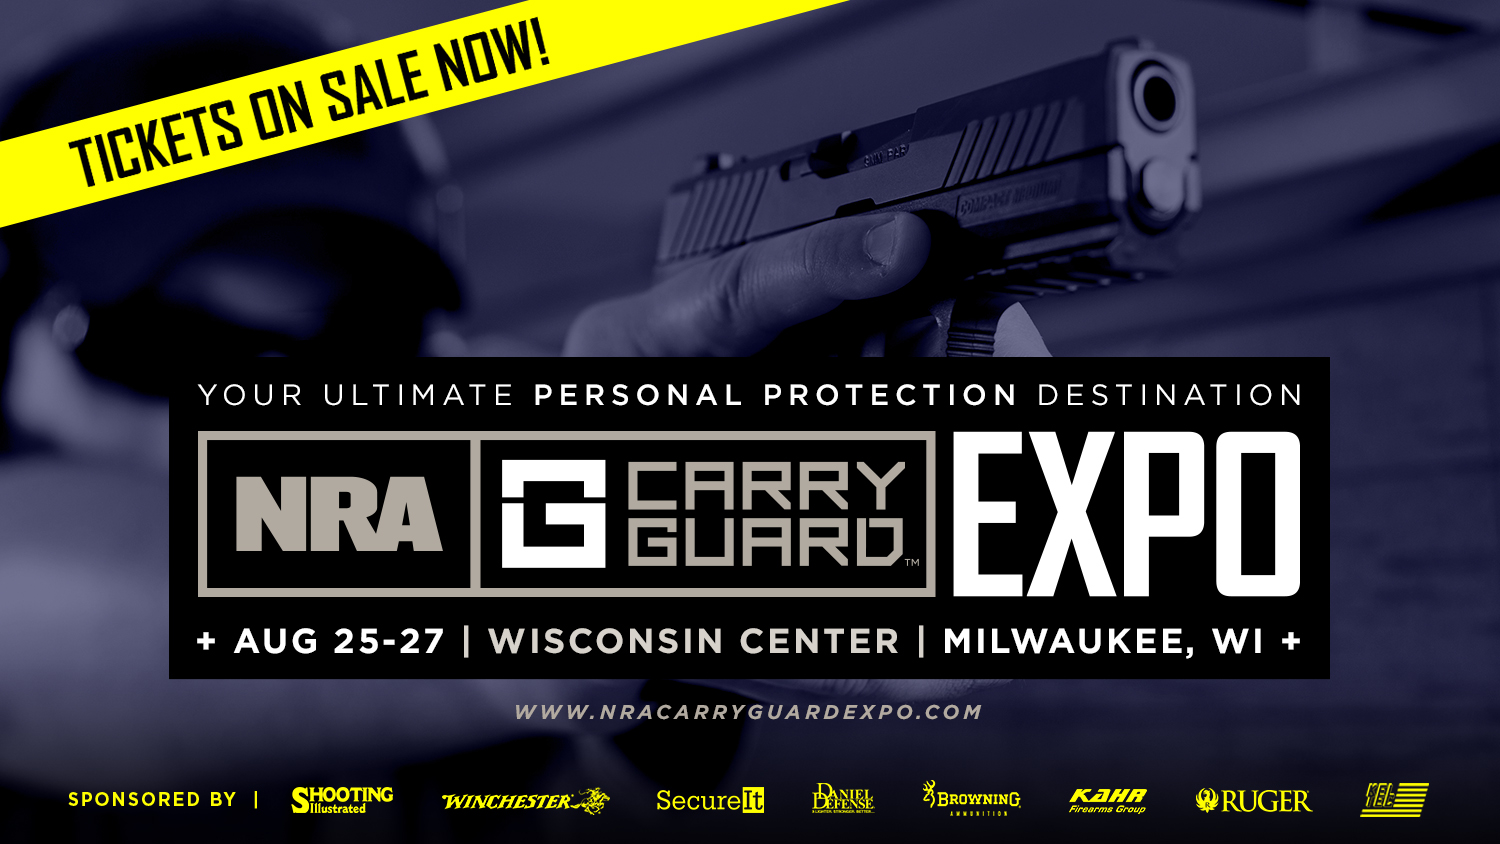 Tickets on sale for the NRA Carry Guard Expo!